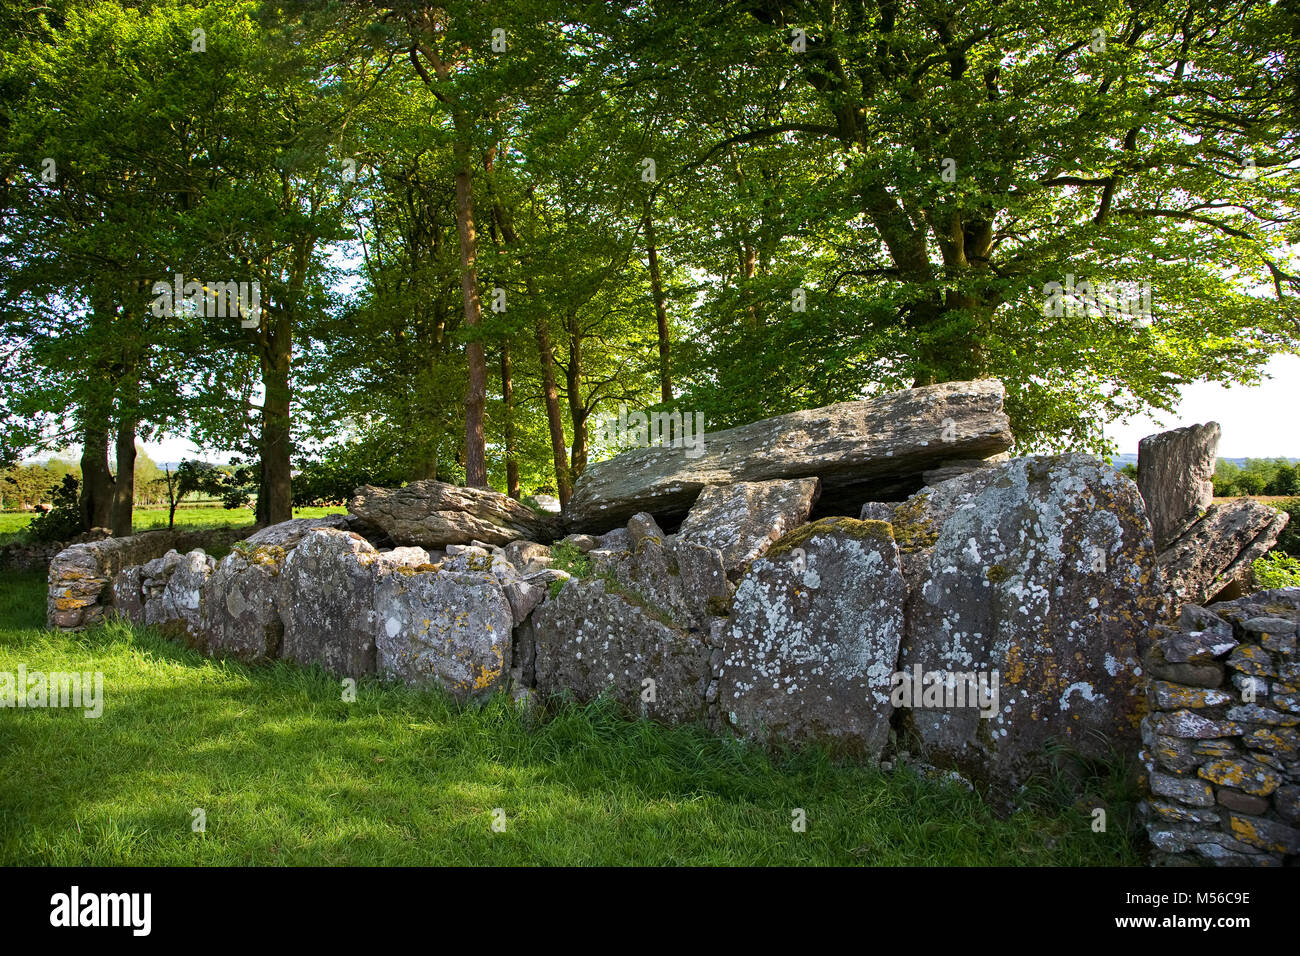 Labbacallee wedge tomb pre-historic burial monument, near Glanworth, County Cork, Ireland is the largest in Ireland and dates from roughly 2300 BC. Stock Photo